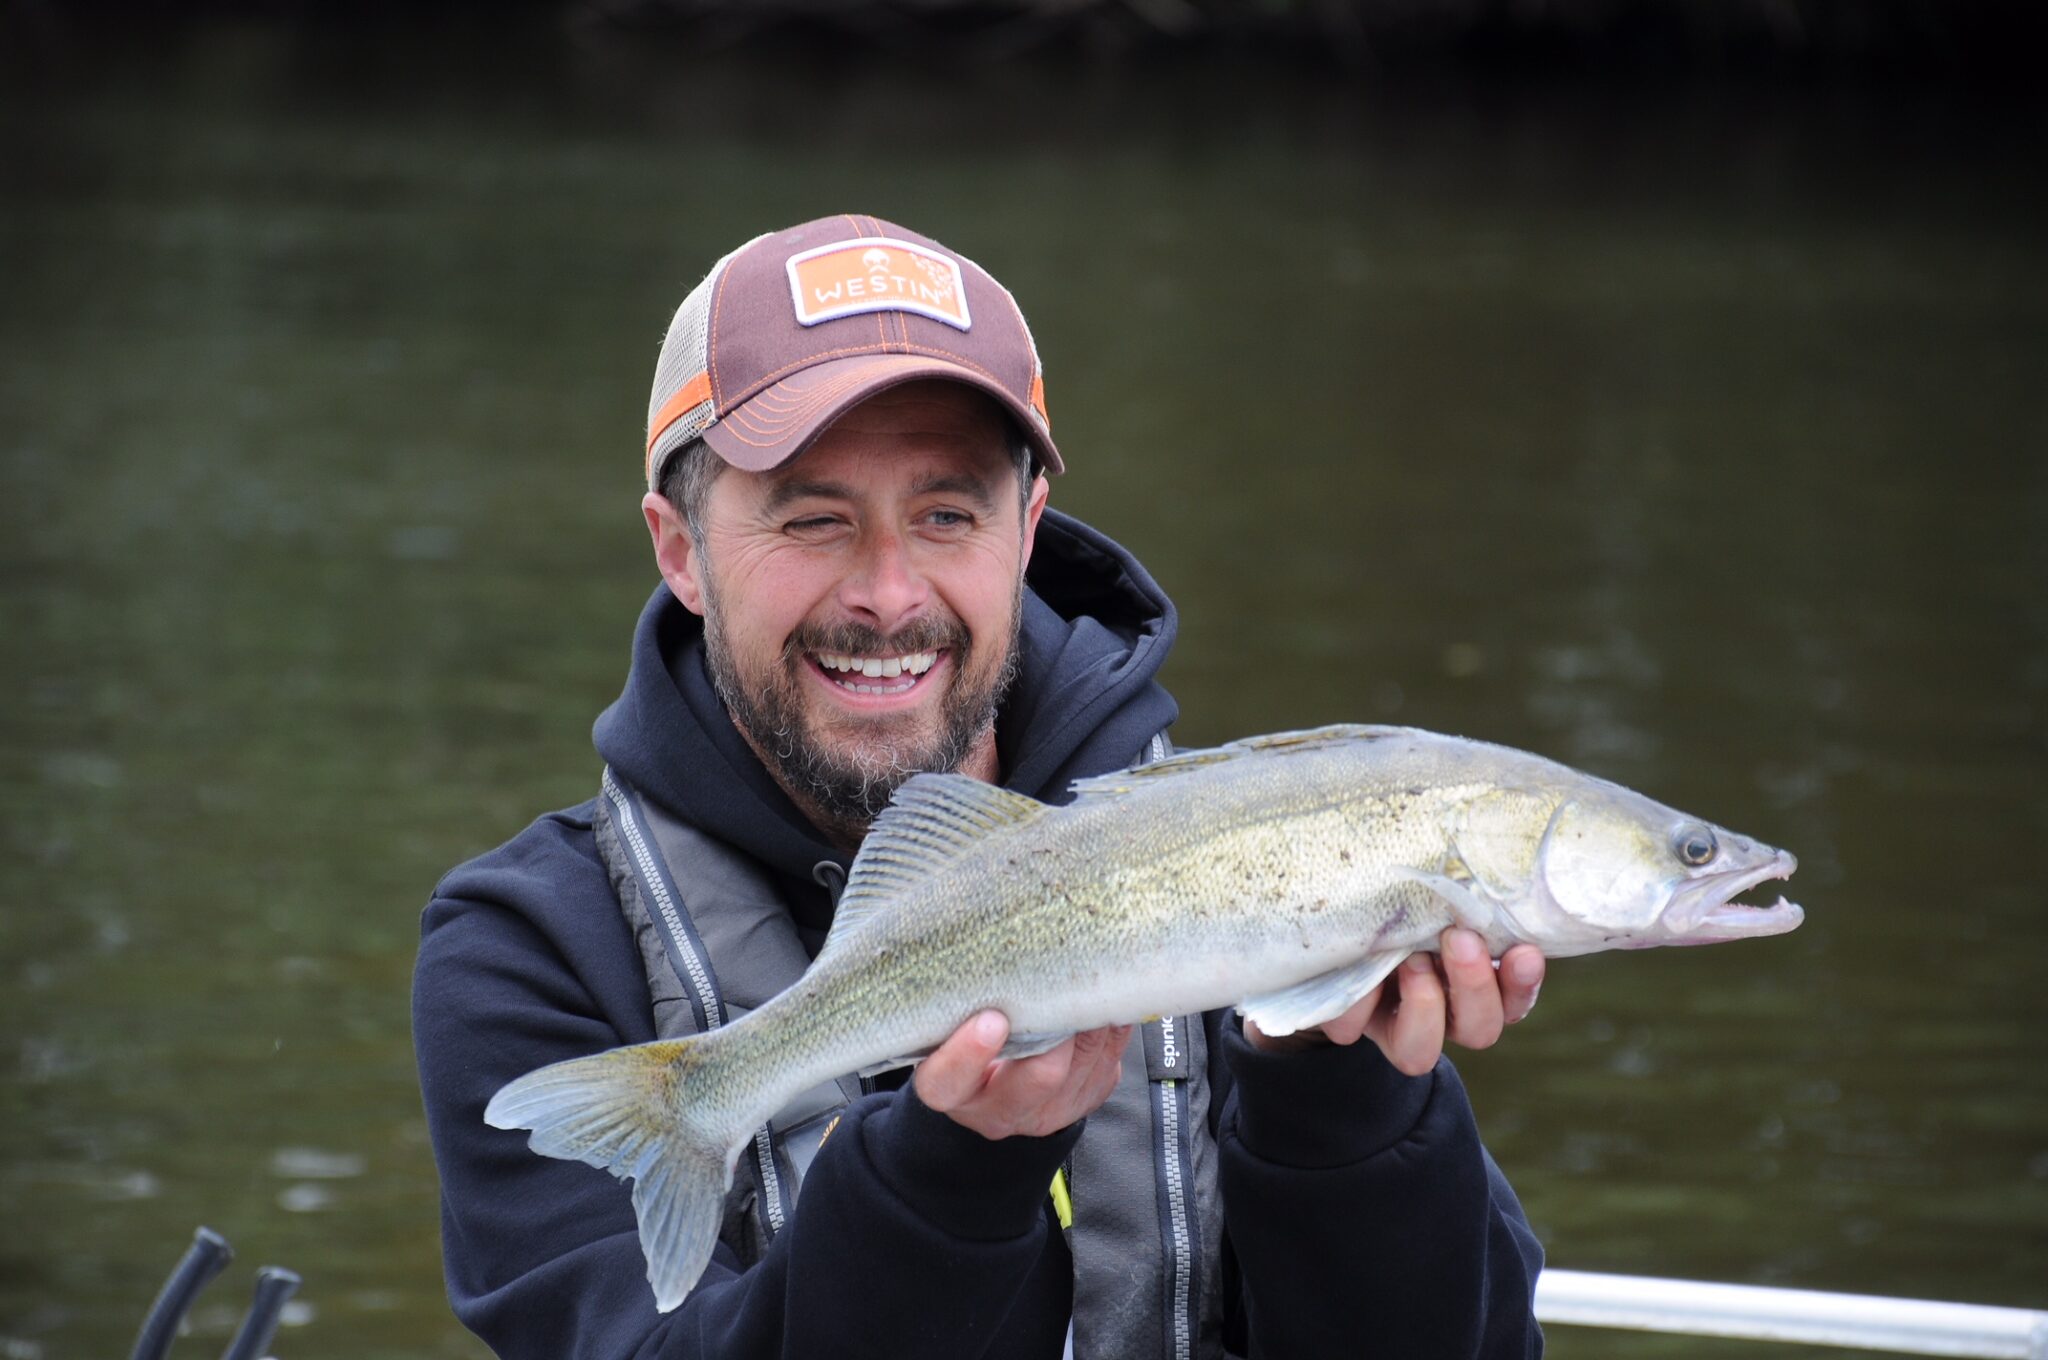 Z-Man Fishing UK - Rich Westhorpe has been doing really well over